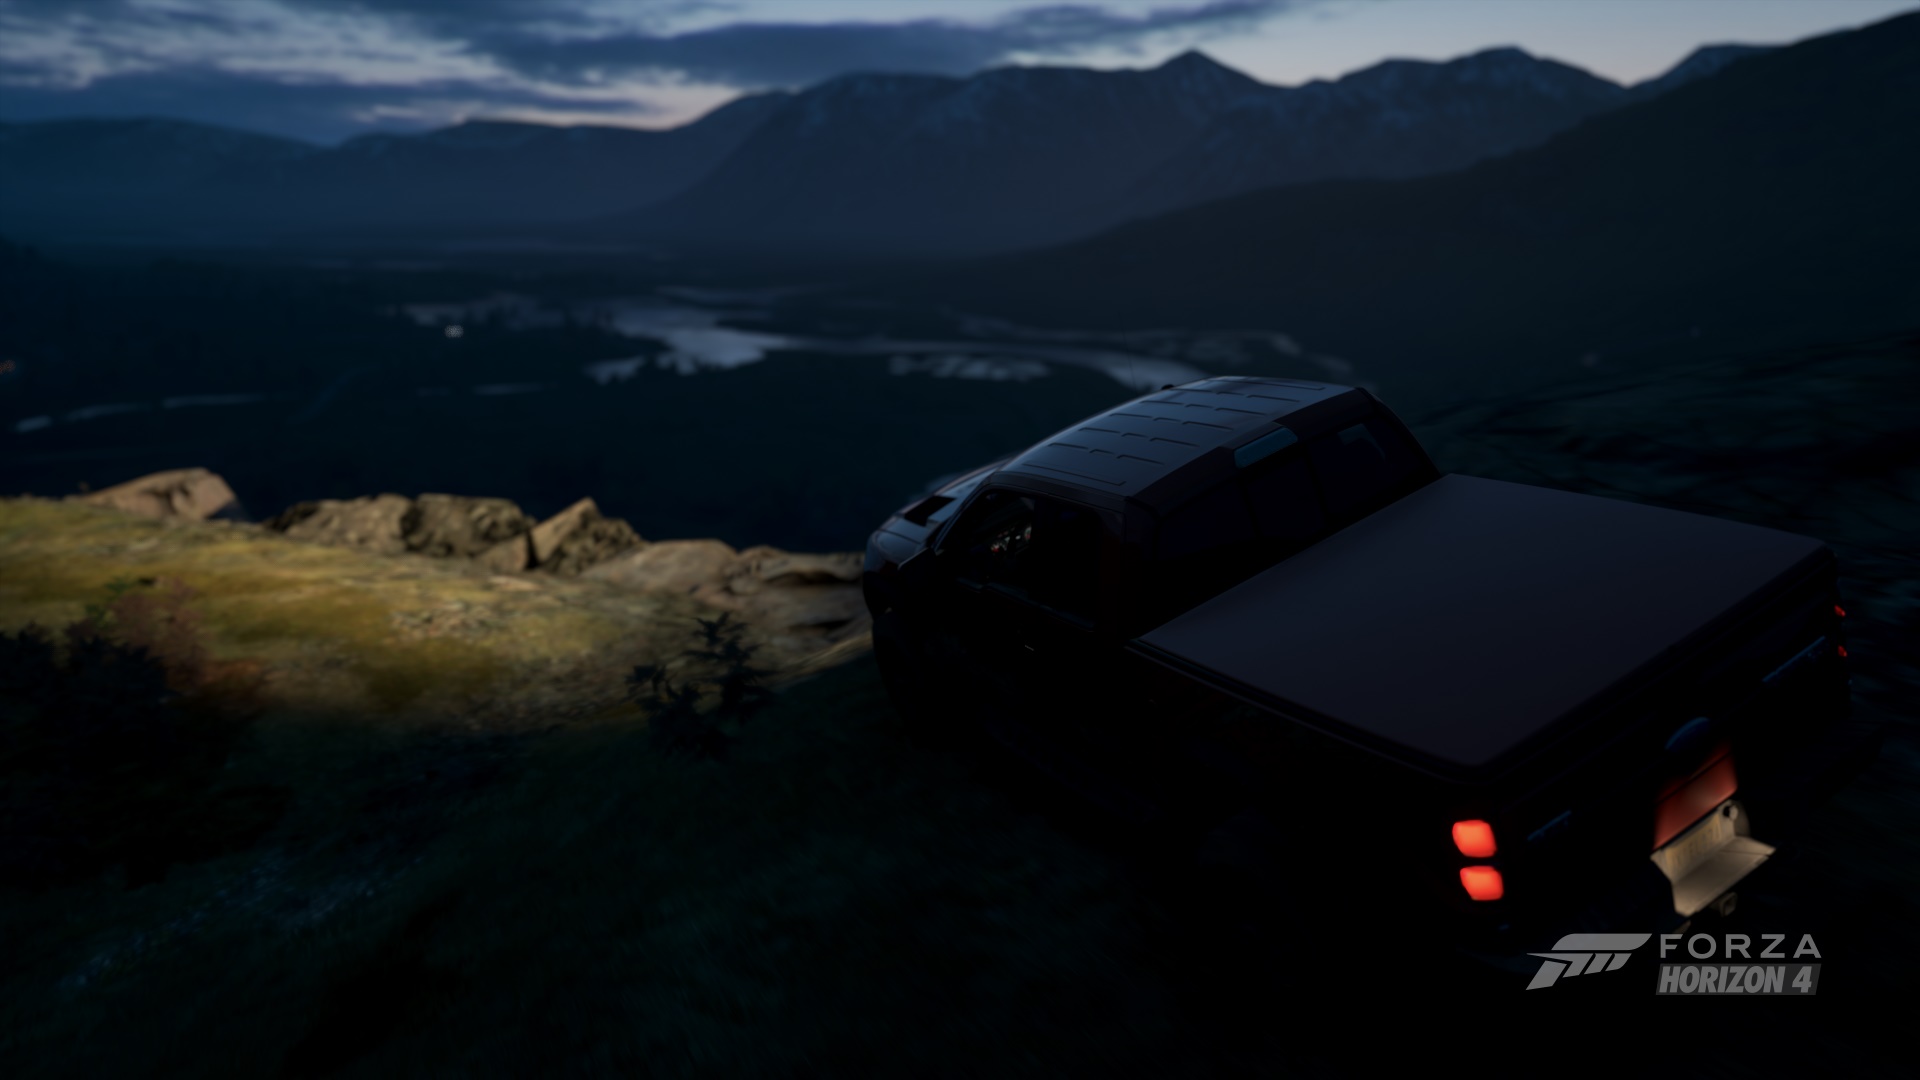 Forza Games Forza Truck Car Vehicle Mountains Lake Offroad 4x4 Night 1920x1080